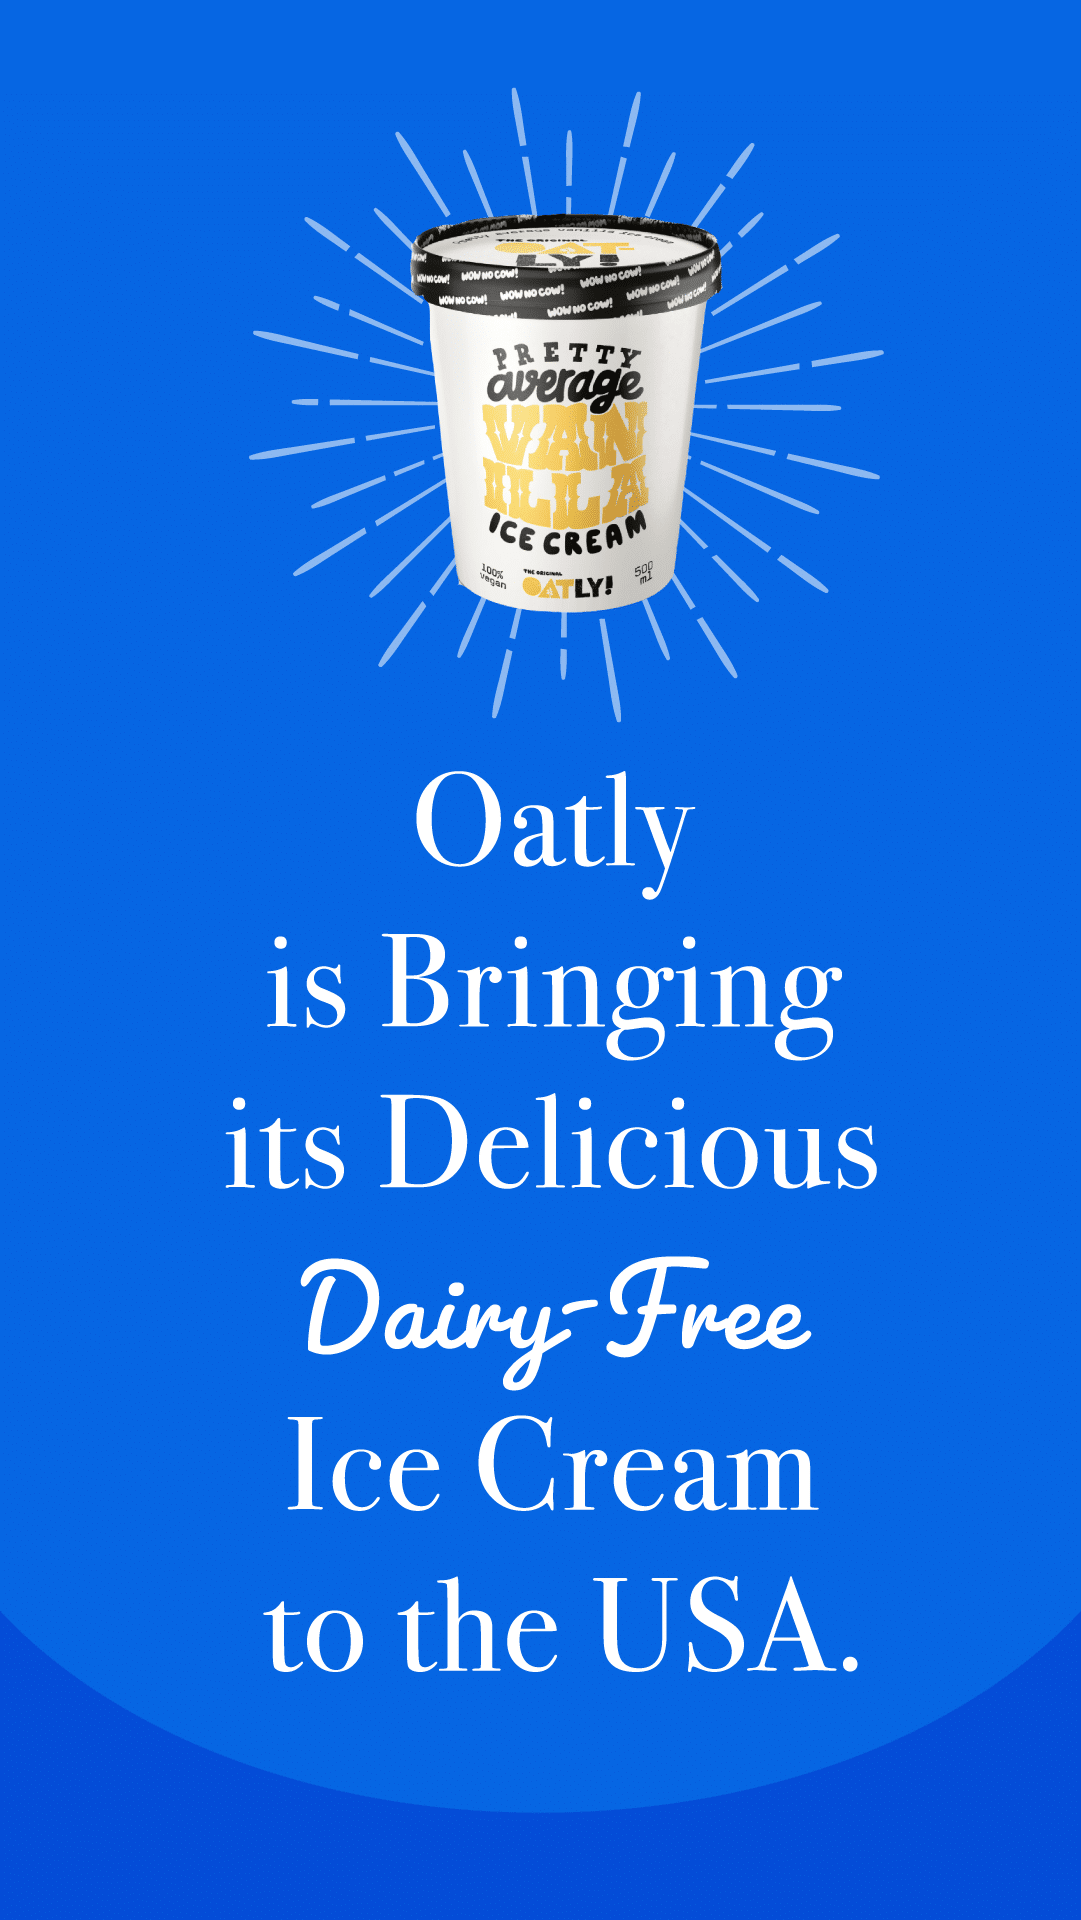 Oatly Is Bringing Its Delicious Dairy-Free Ice Cream to the USA